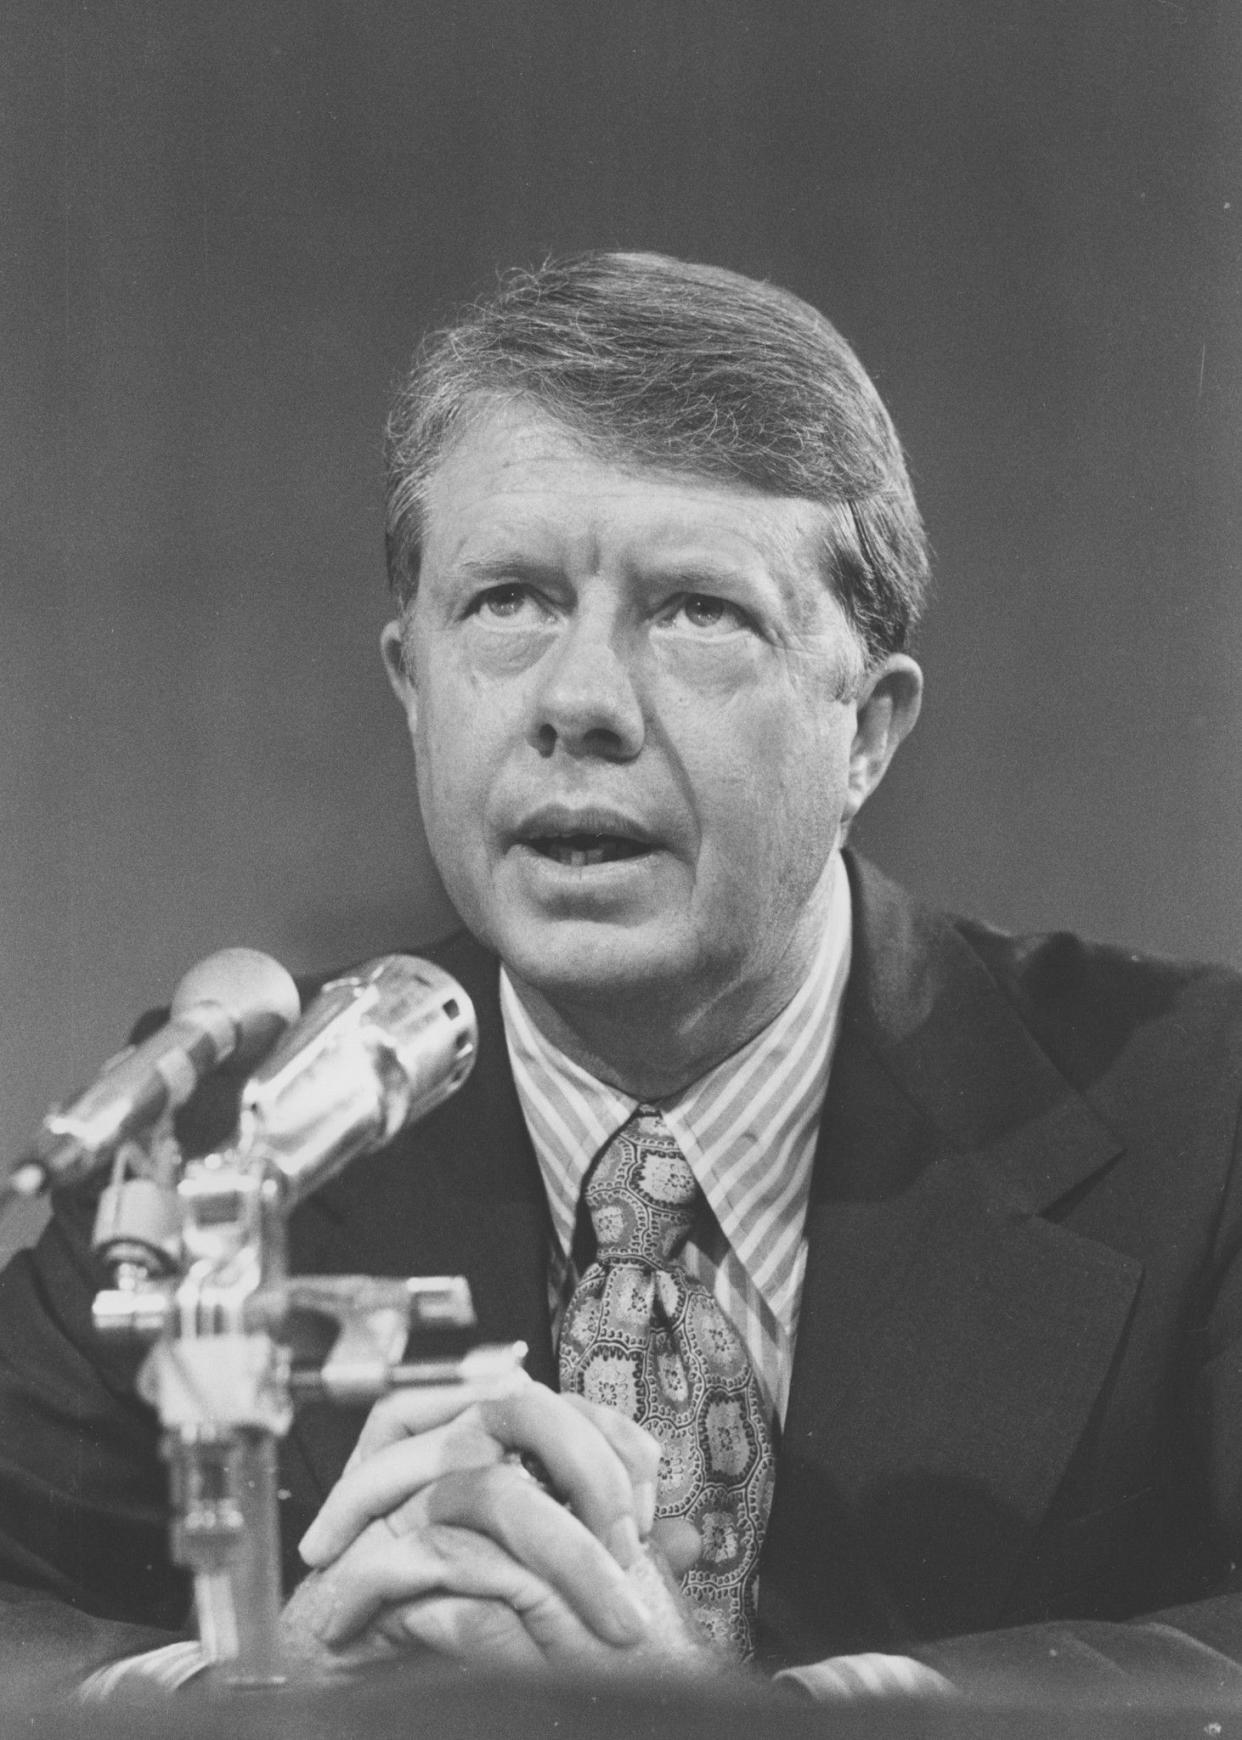 Gov. Jimmy Carter discusses drug issues in Atlanta during his testimony before a Senate Government Operations subcommittee on federal drug control on July 15, 1971, in Washington, D.C.